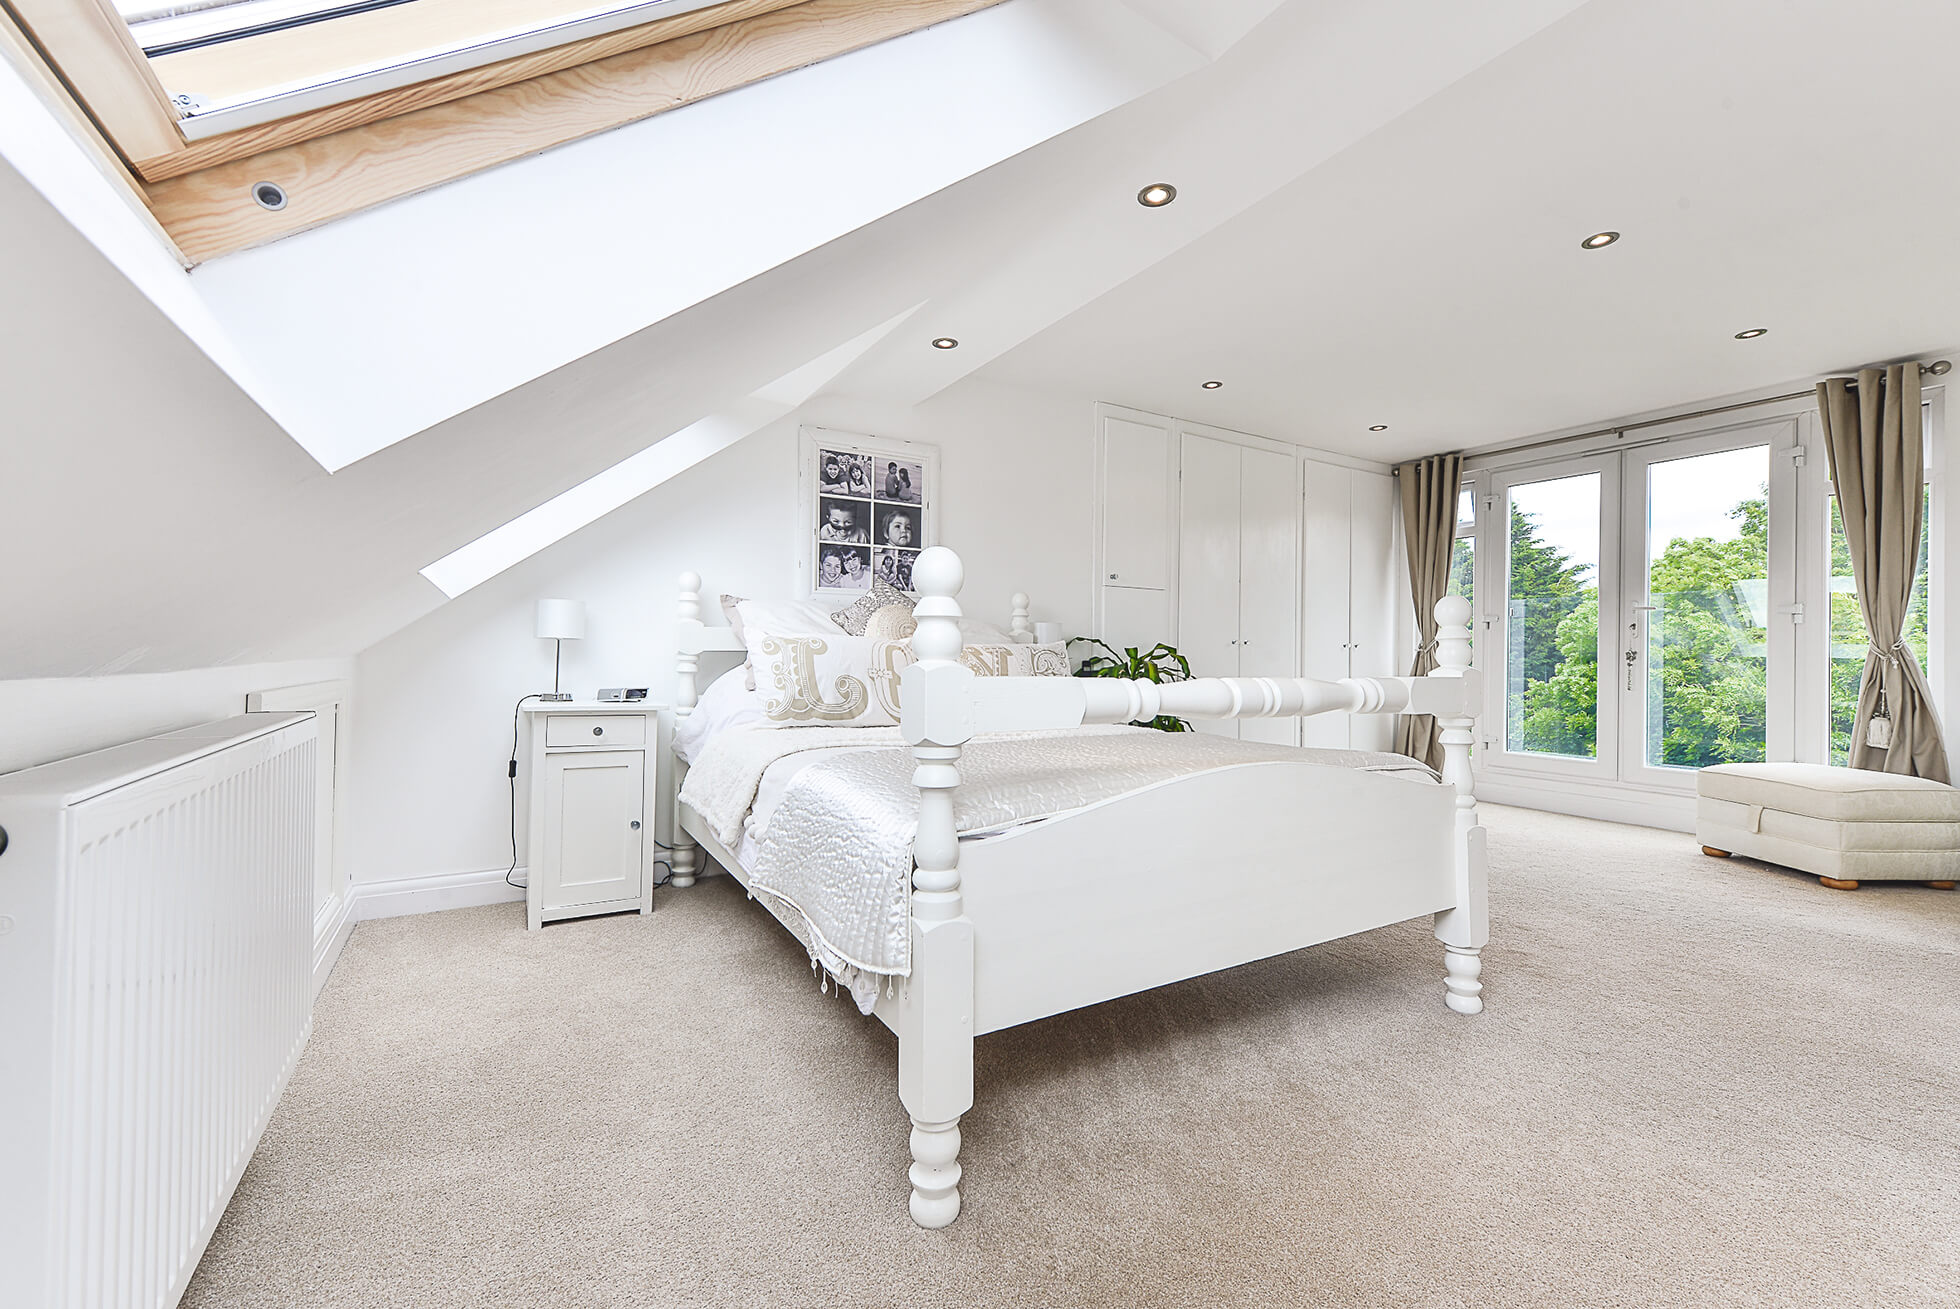 Do you have a question about converting your Loft in Babbs Green? Here are the most popular questions asked by our clients.